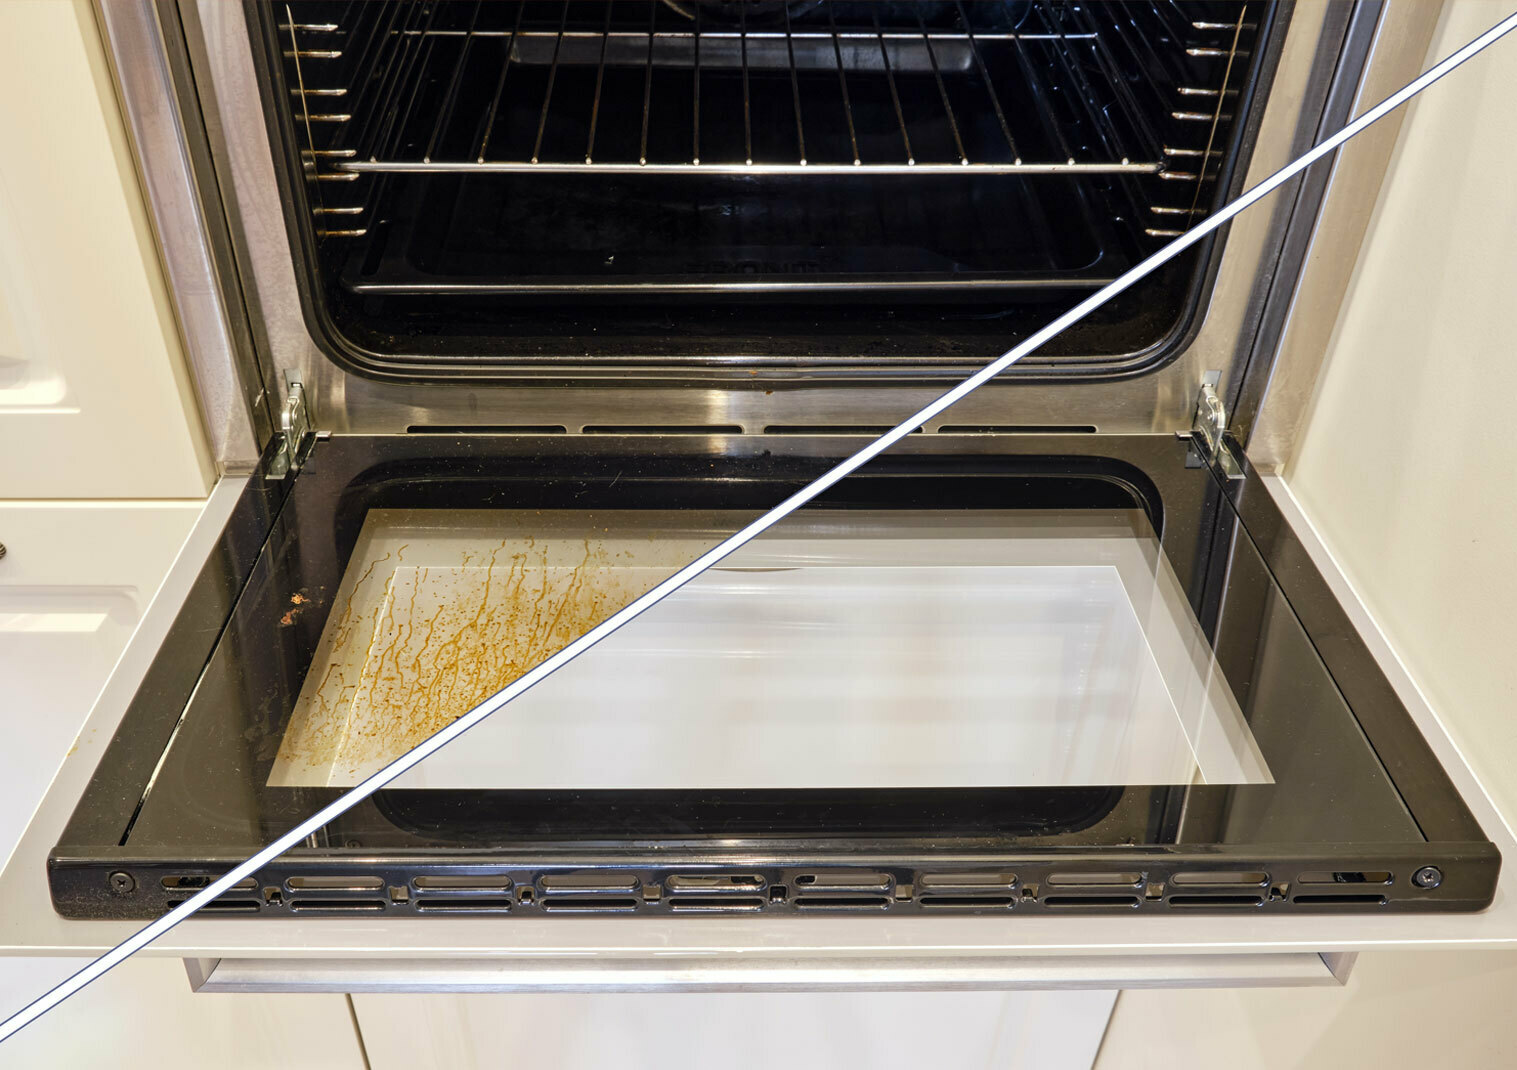 30% off CJ Cleaning Oven Cleaning Special